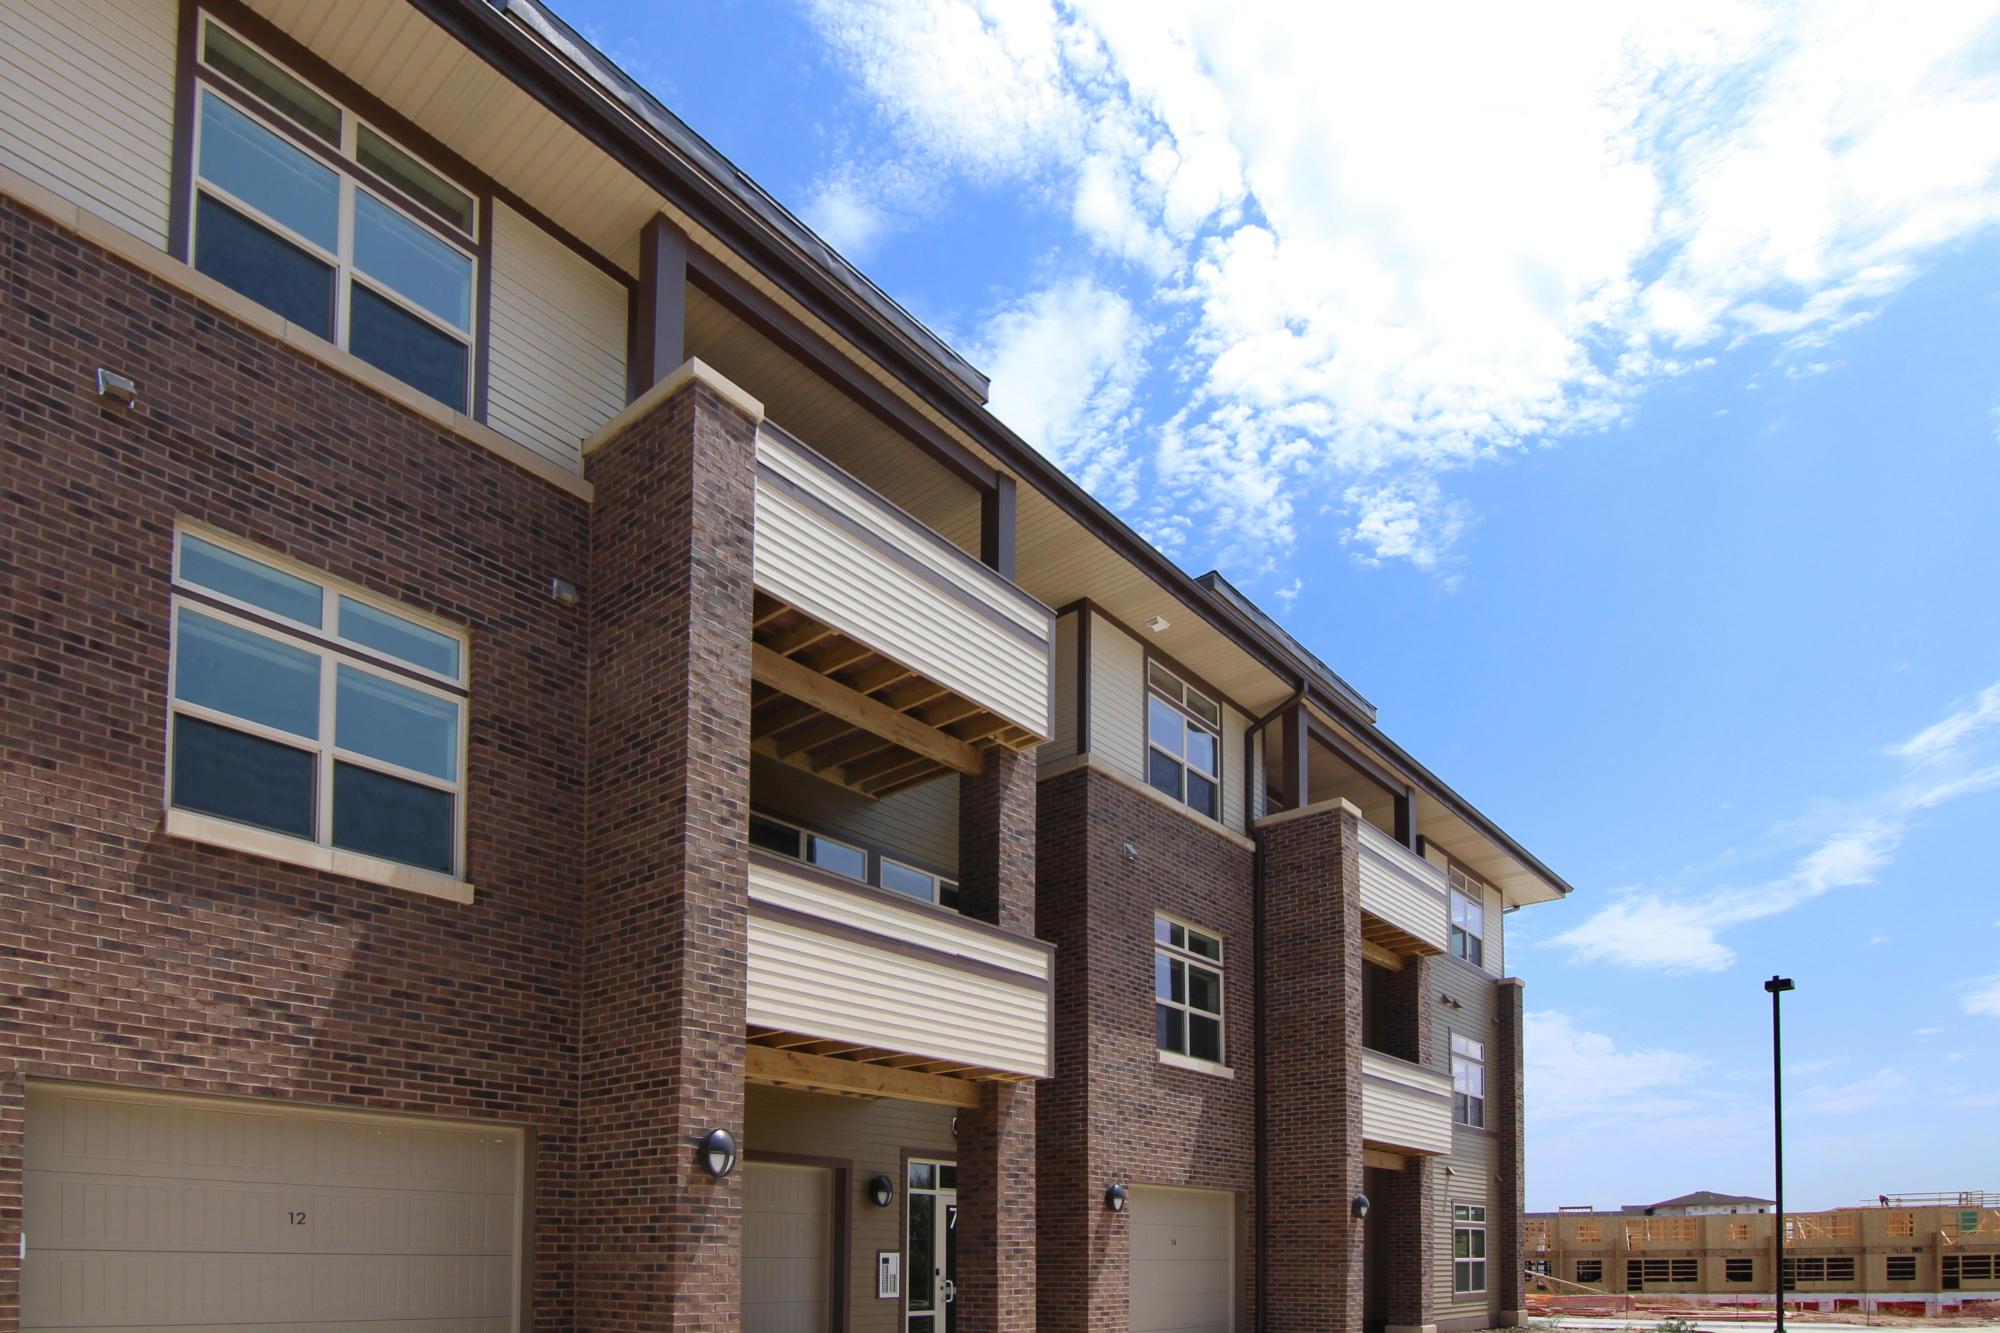 Exterior photograph of the Brookside Apartments at Fallbrook with green grass and blue skies